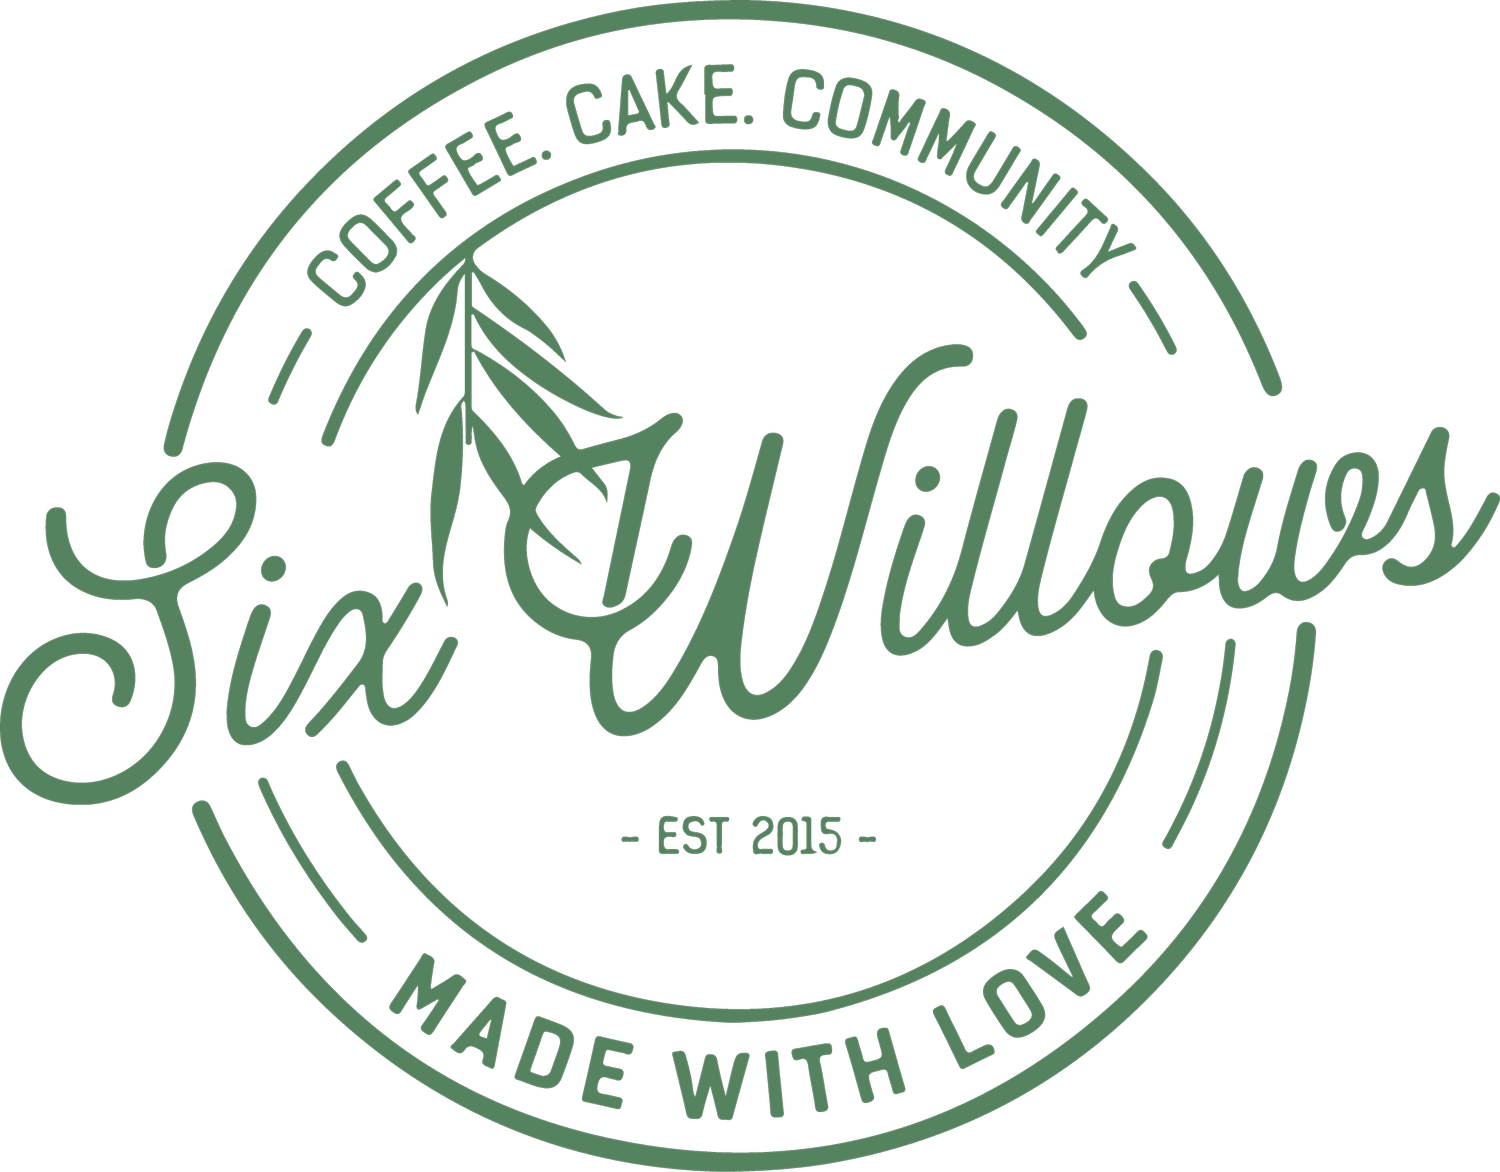 Six Willows Cafe